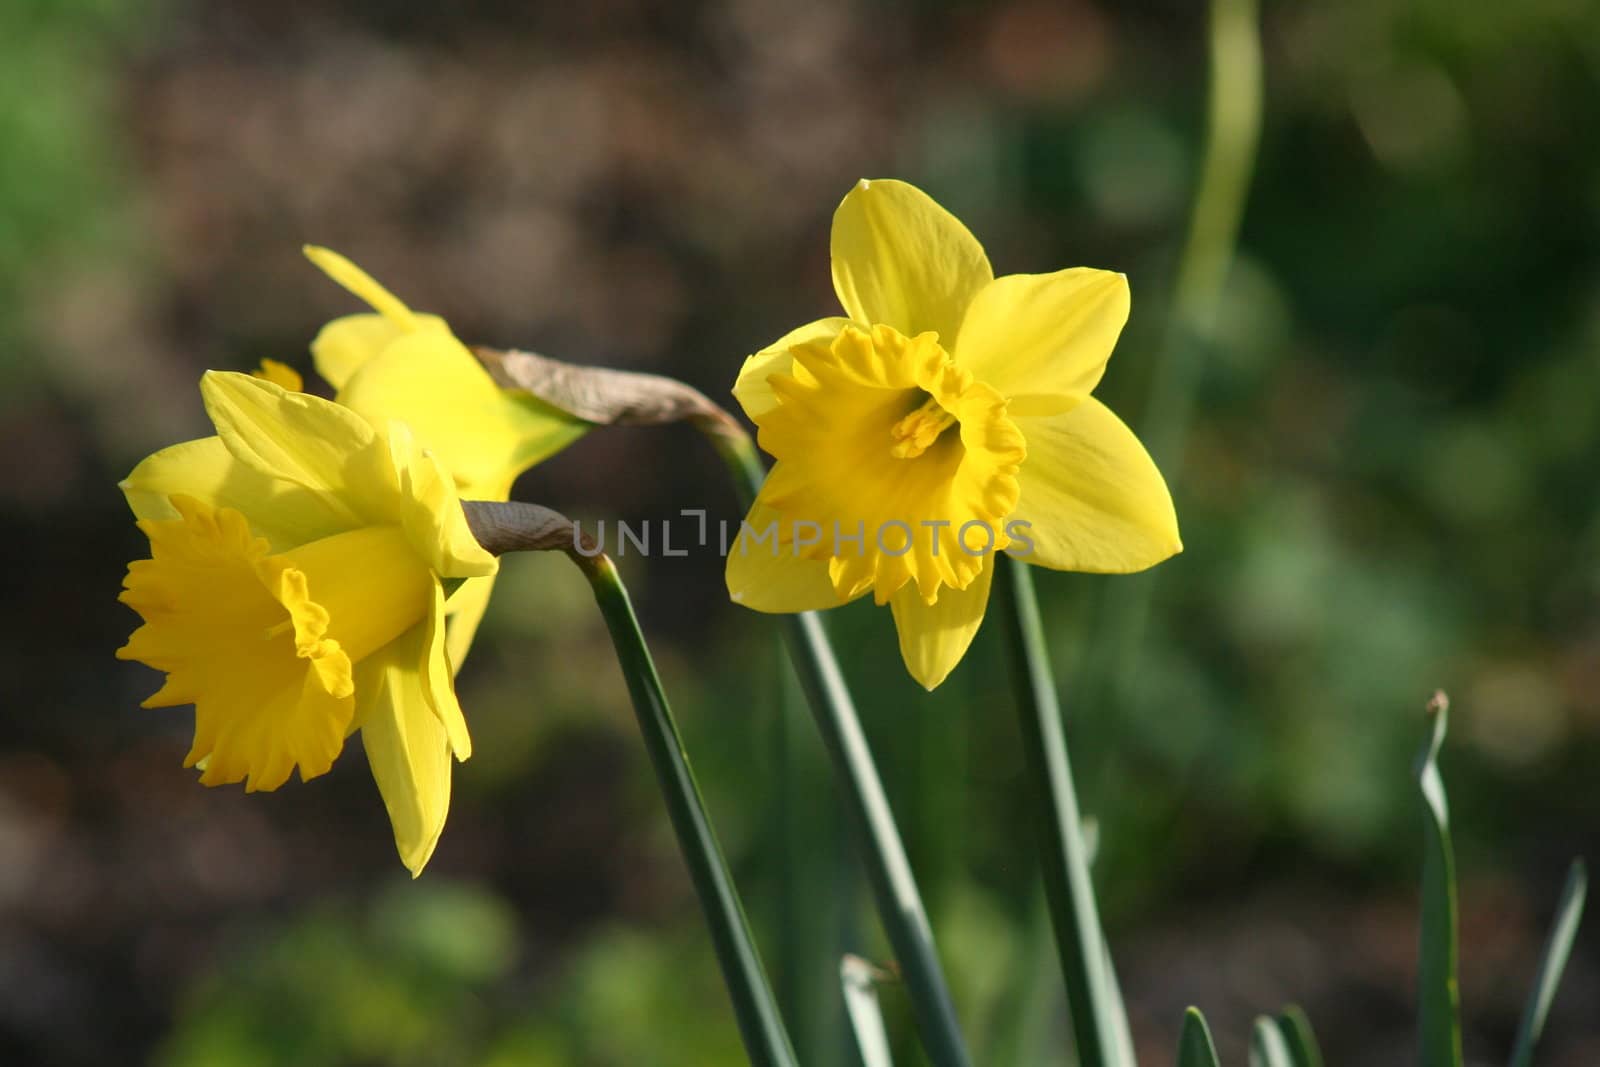 Close up of daffodil flowers in a park.